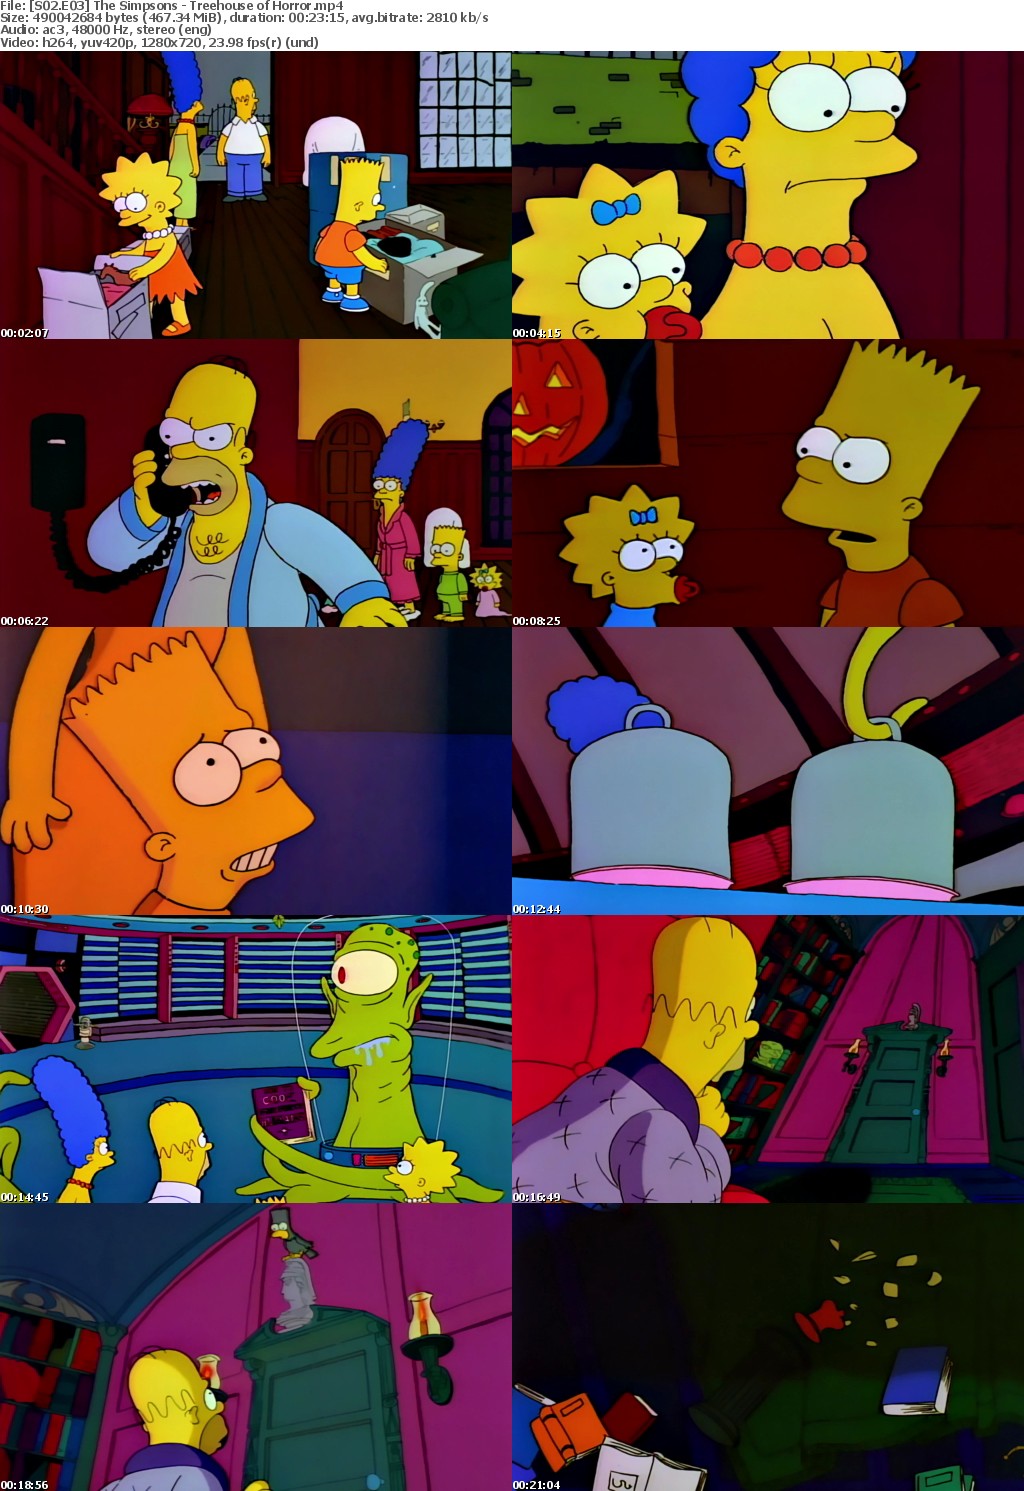 The Simpsons S1 E3 Treehouse of Horror MP4 720p H264 WEBRip EzzRips